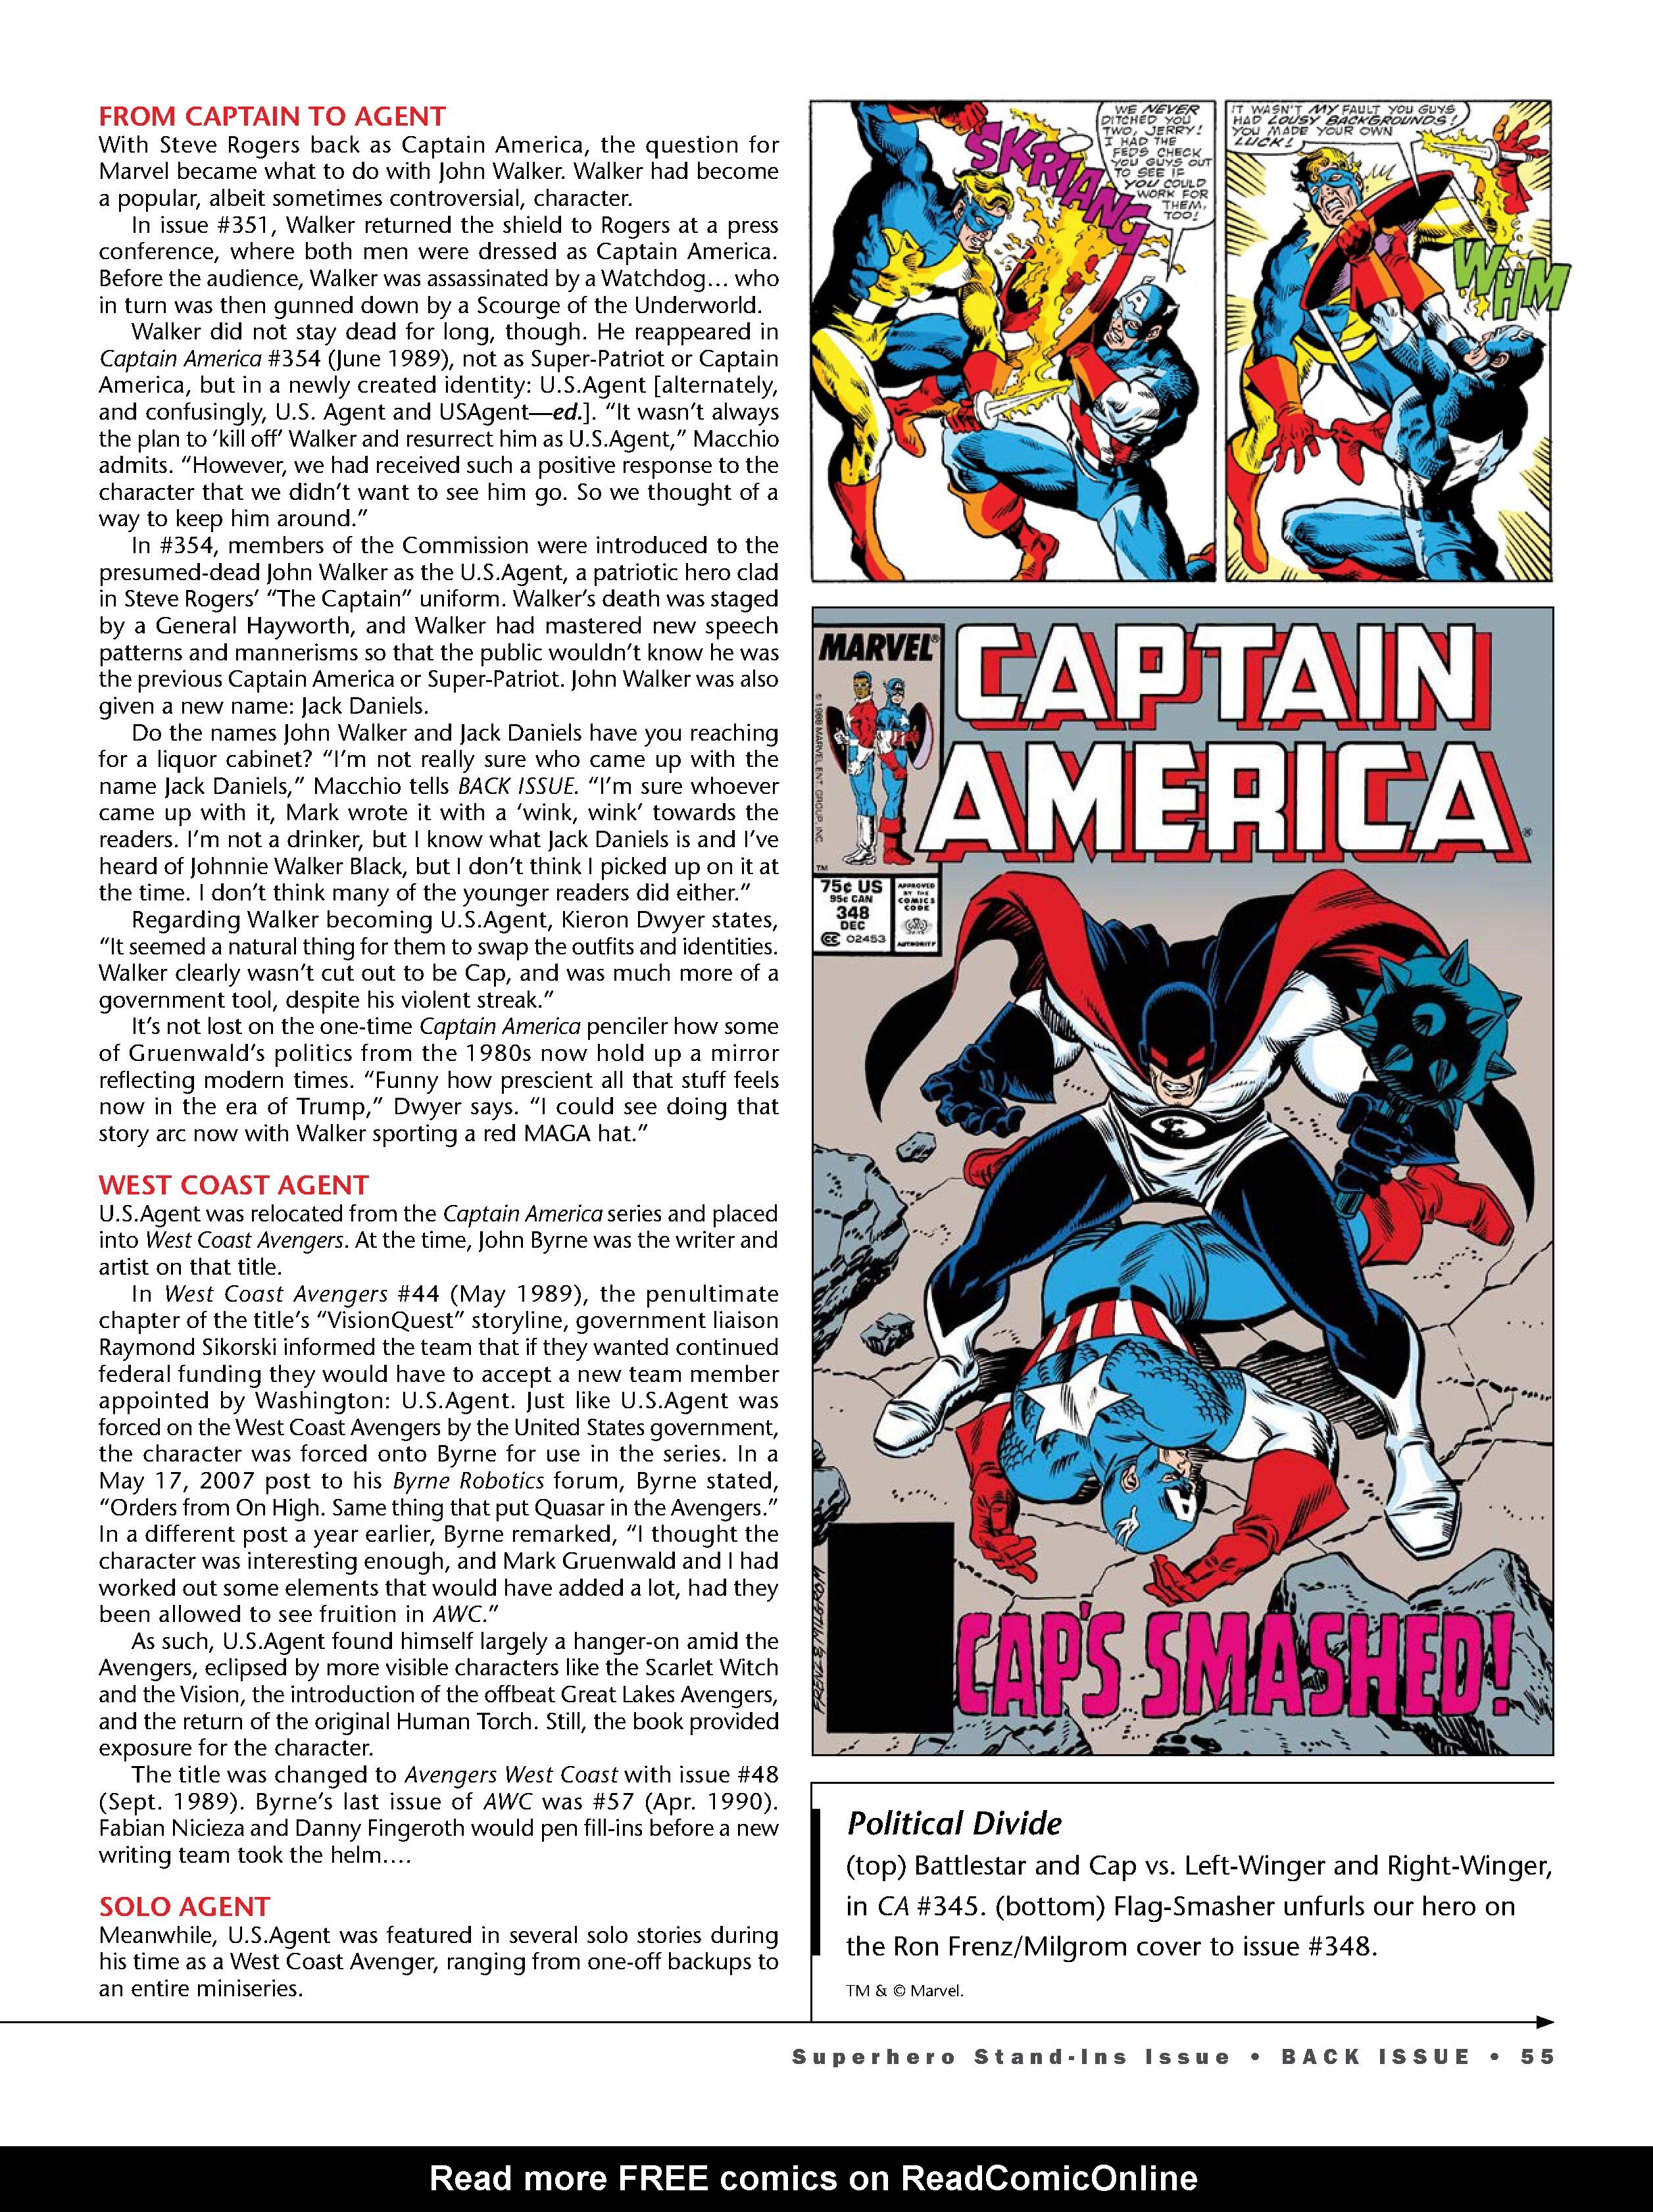 Read online Back Issue comic -  Issue #117 - 57